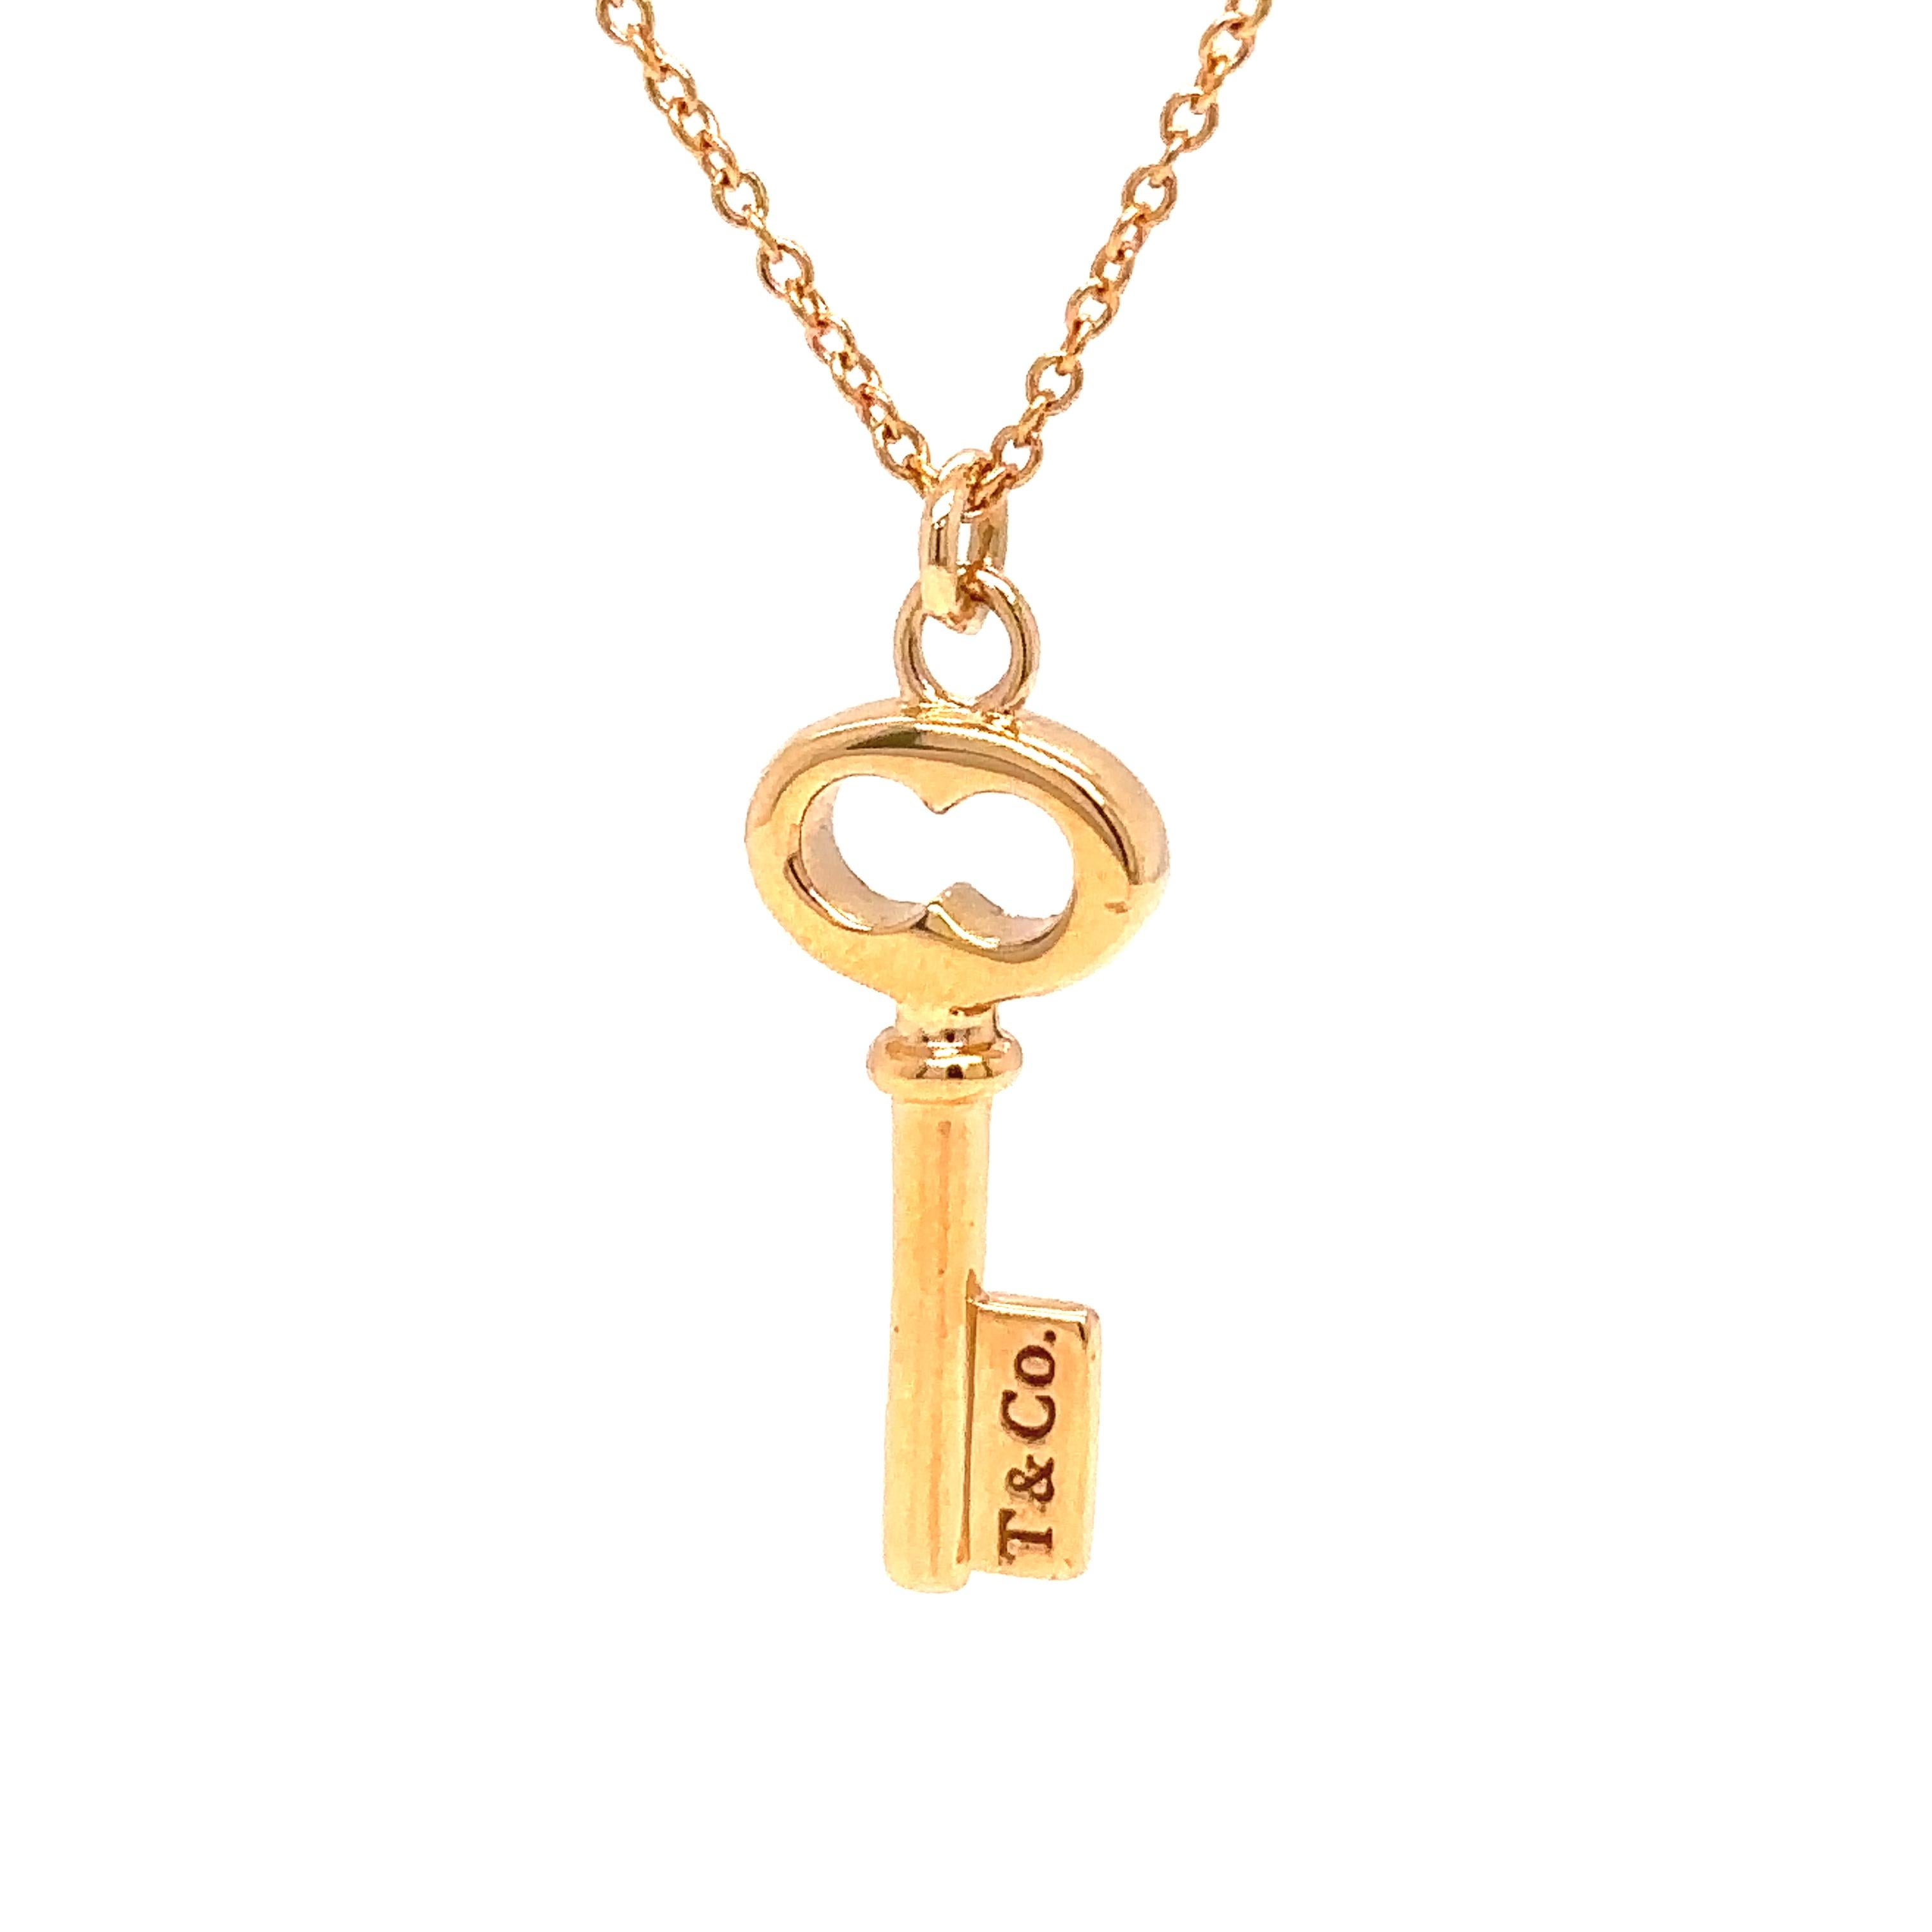 Tiffany & Co Mini Oval Key Pendant in 18ct Rose Gold, on a 16 inch chain, around .75 inch long.

Metal: 18ct Rose Gold
Carat: N/A
Colour: N/A
Clarity: N/A
Cut: N/A
Weight: 3.5 grams
Engravings/Markings: N/A

Size/Measurement: 16in chain

Current